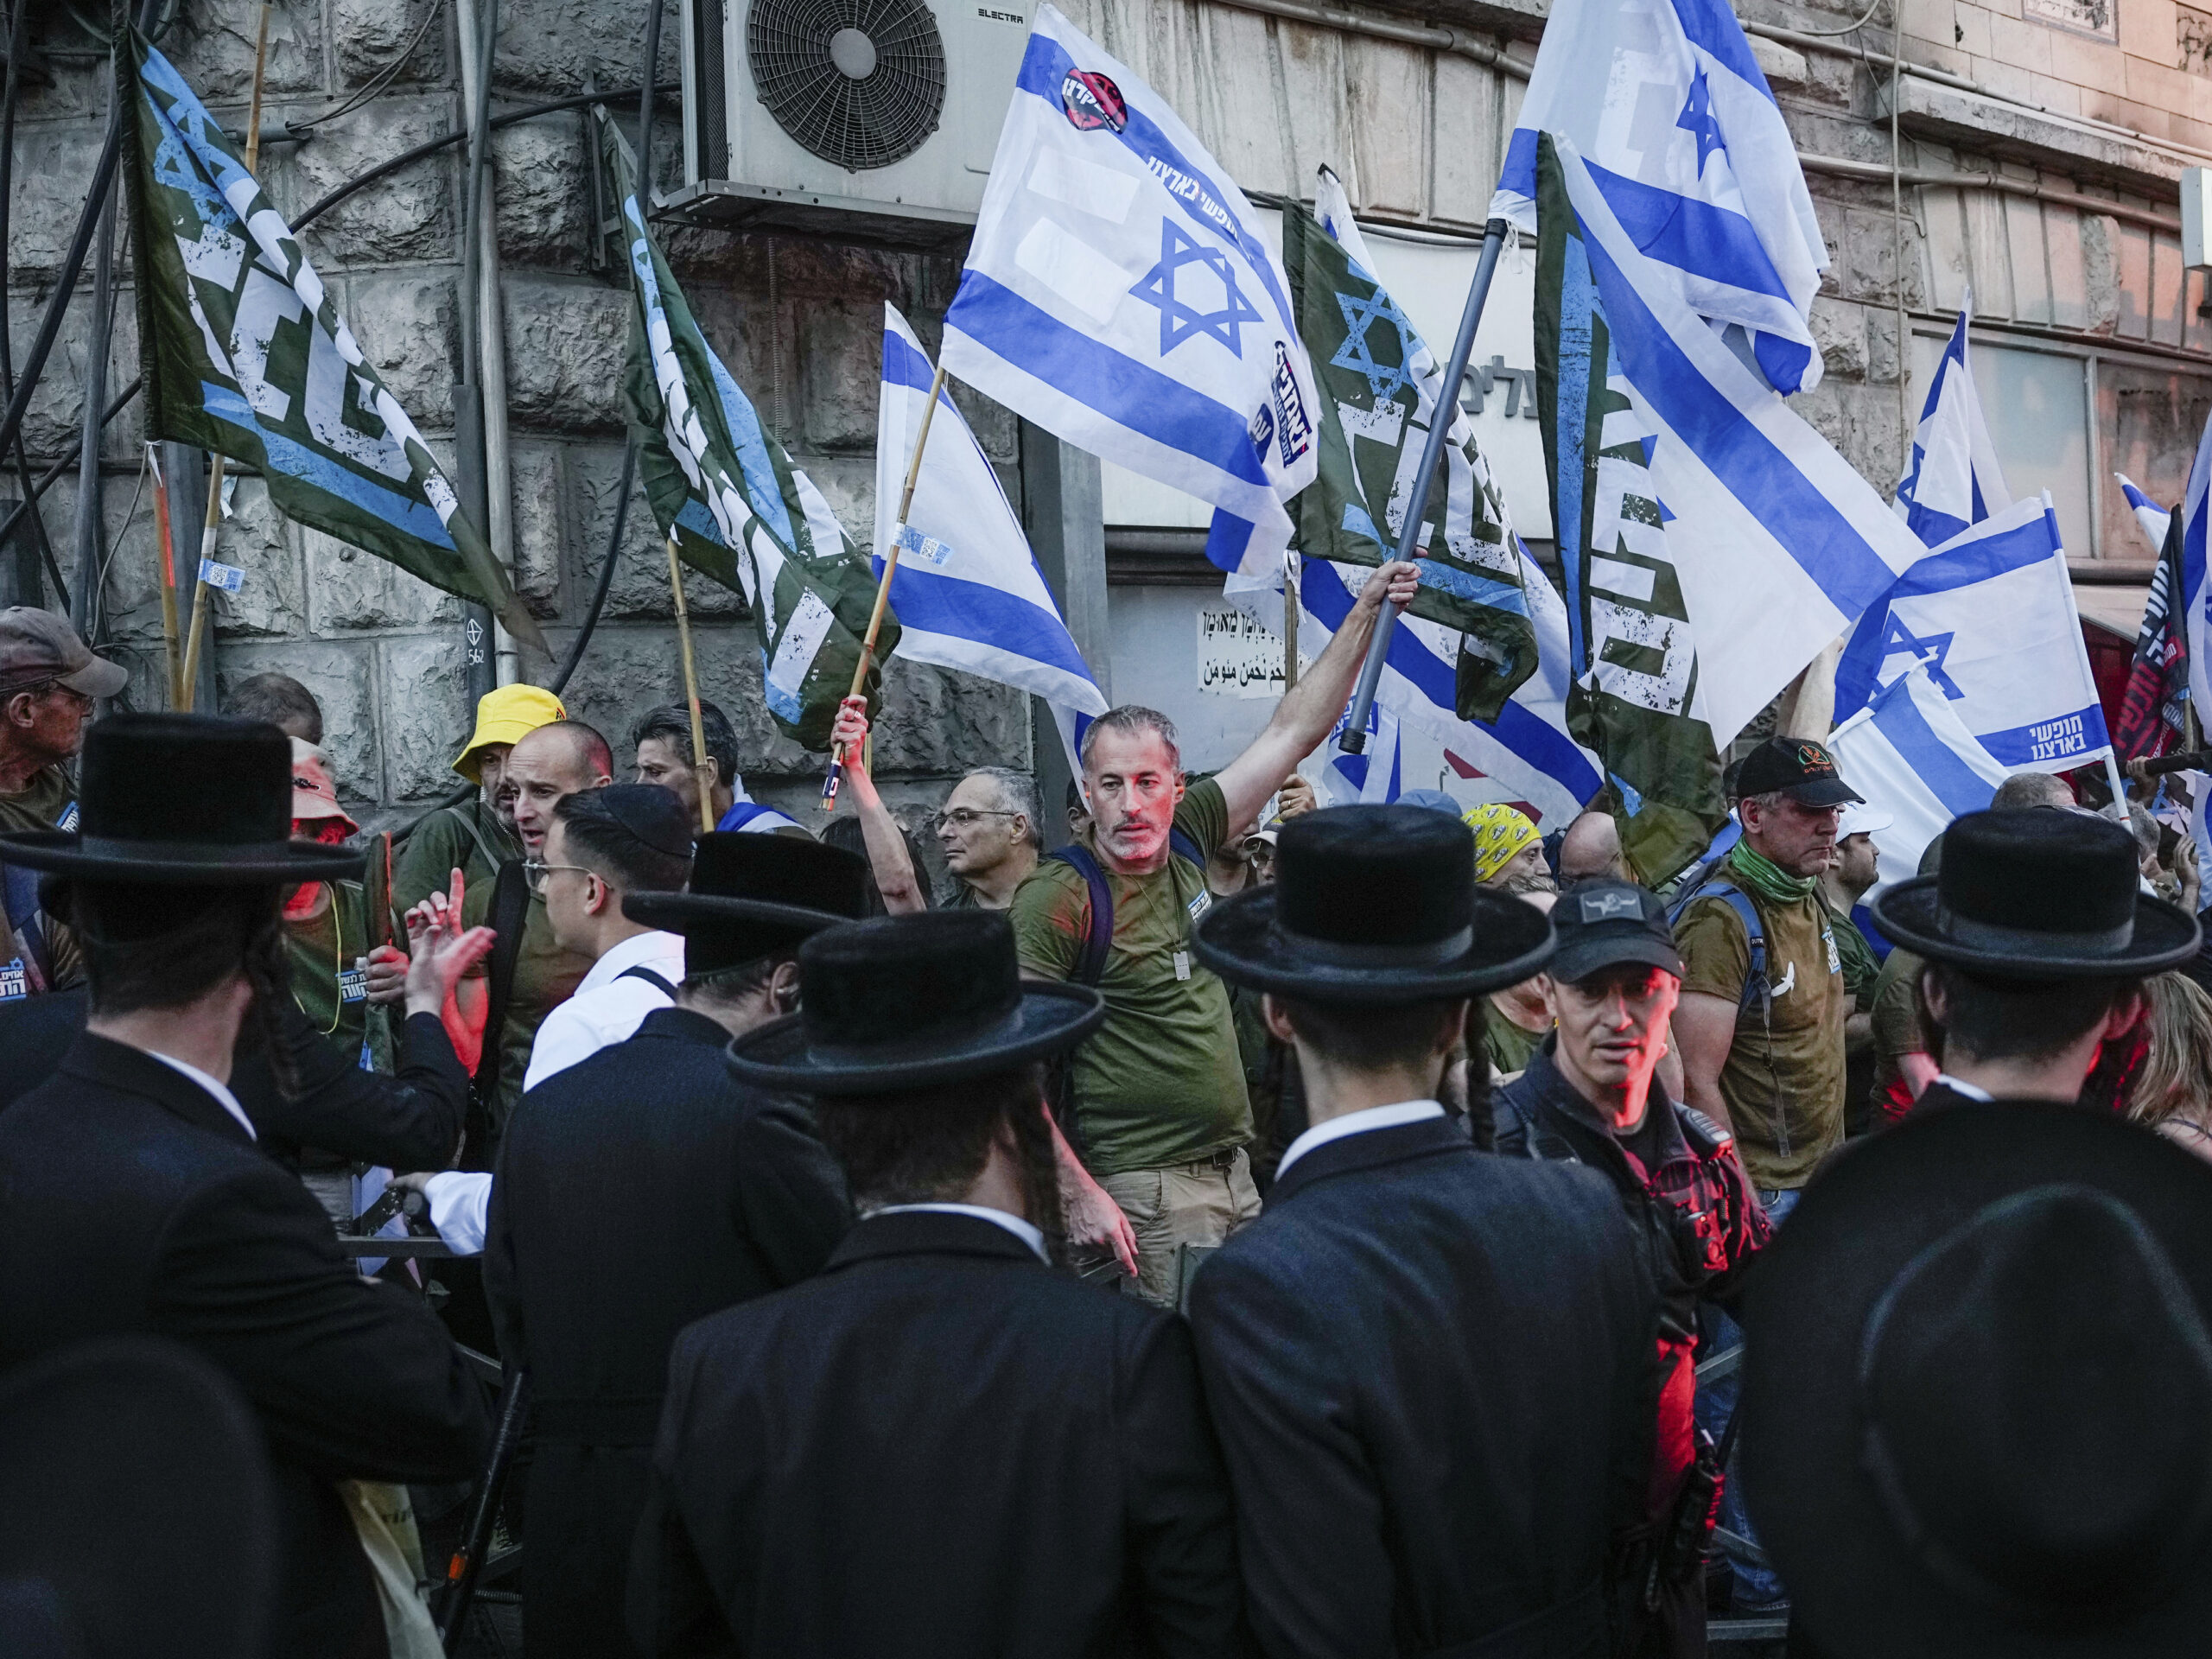 Members of the 'Brothers in Arms' reservist protest group wave Israeli flags during a demonstration in the ultra-Orthodox neighborhood of Mea Shearim, demanding equality in Israel's military service, in Jerusalem on Sunday, March 31, 2024.